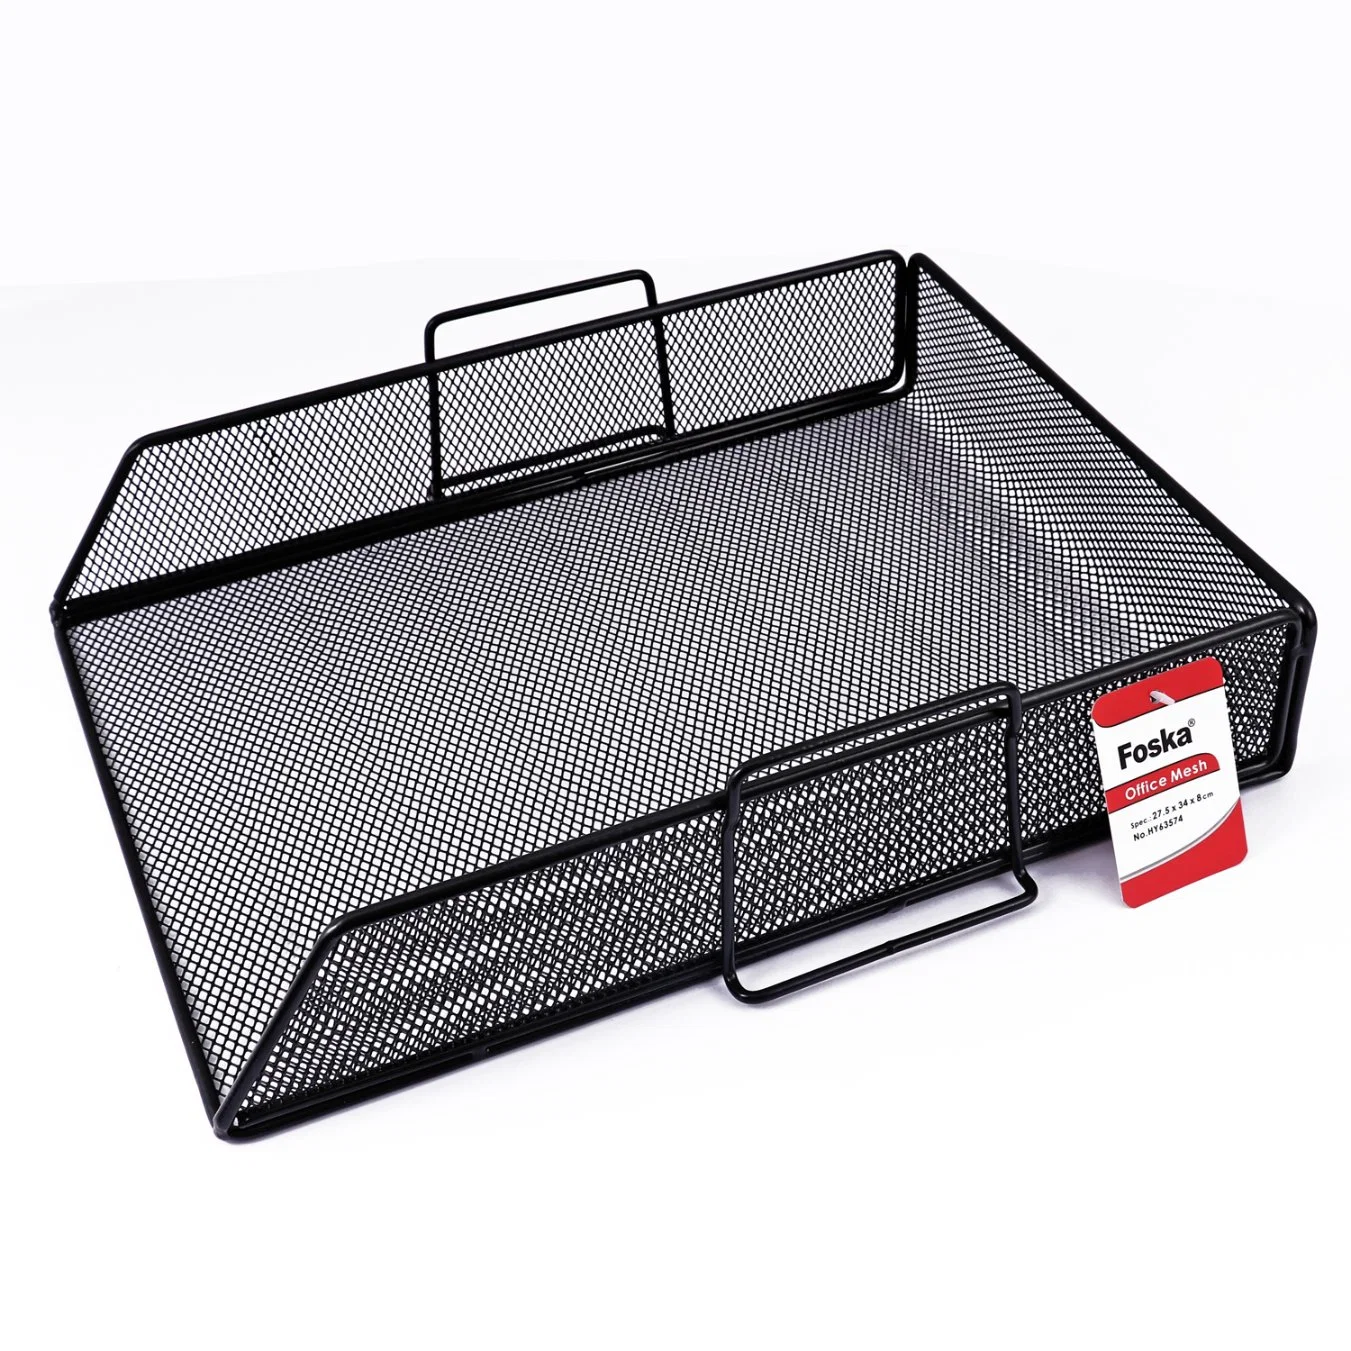 Foska Hot Sale Metal Office Organizer File Tray with Good Quality